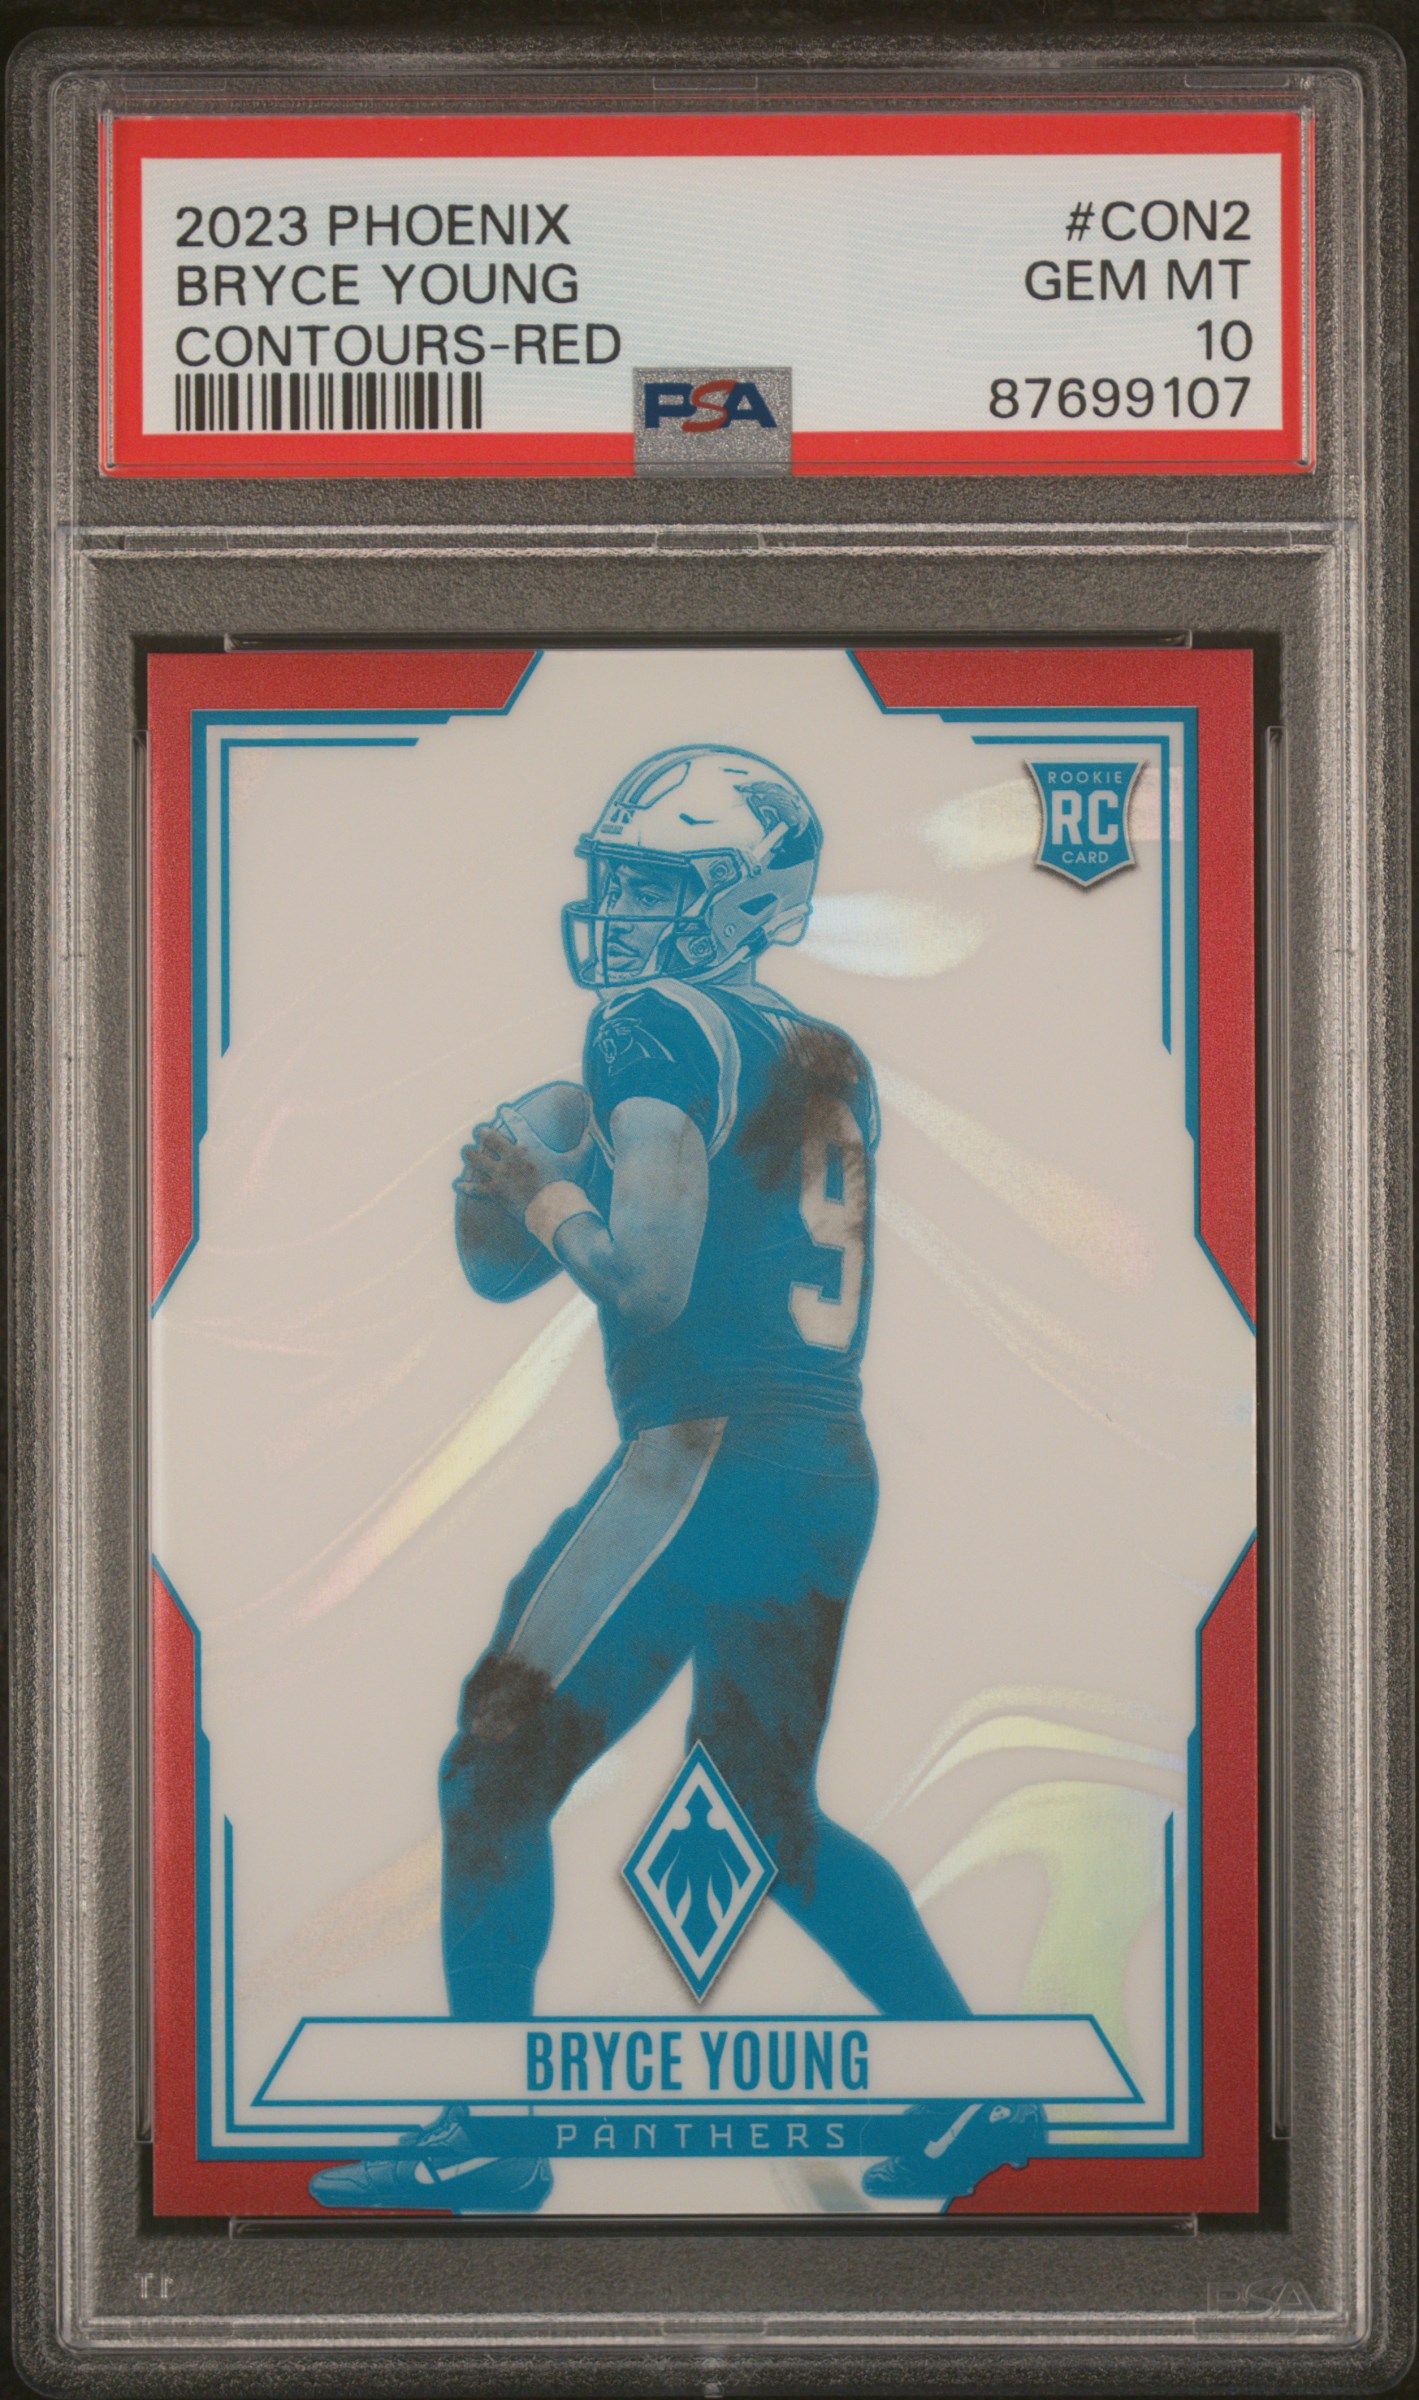 2023 Panini Phoenix Contours Red #CON2 Bryce Young Rookie Card (#029/199) – PSA GEM MT 10